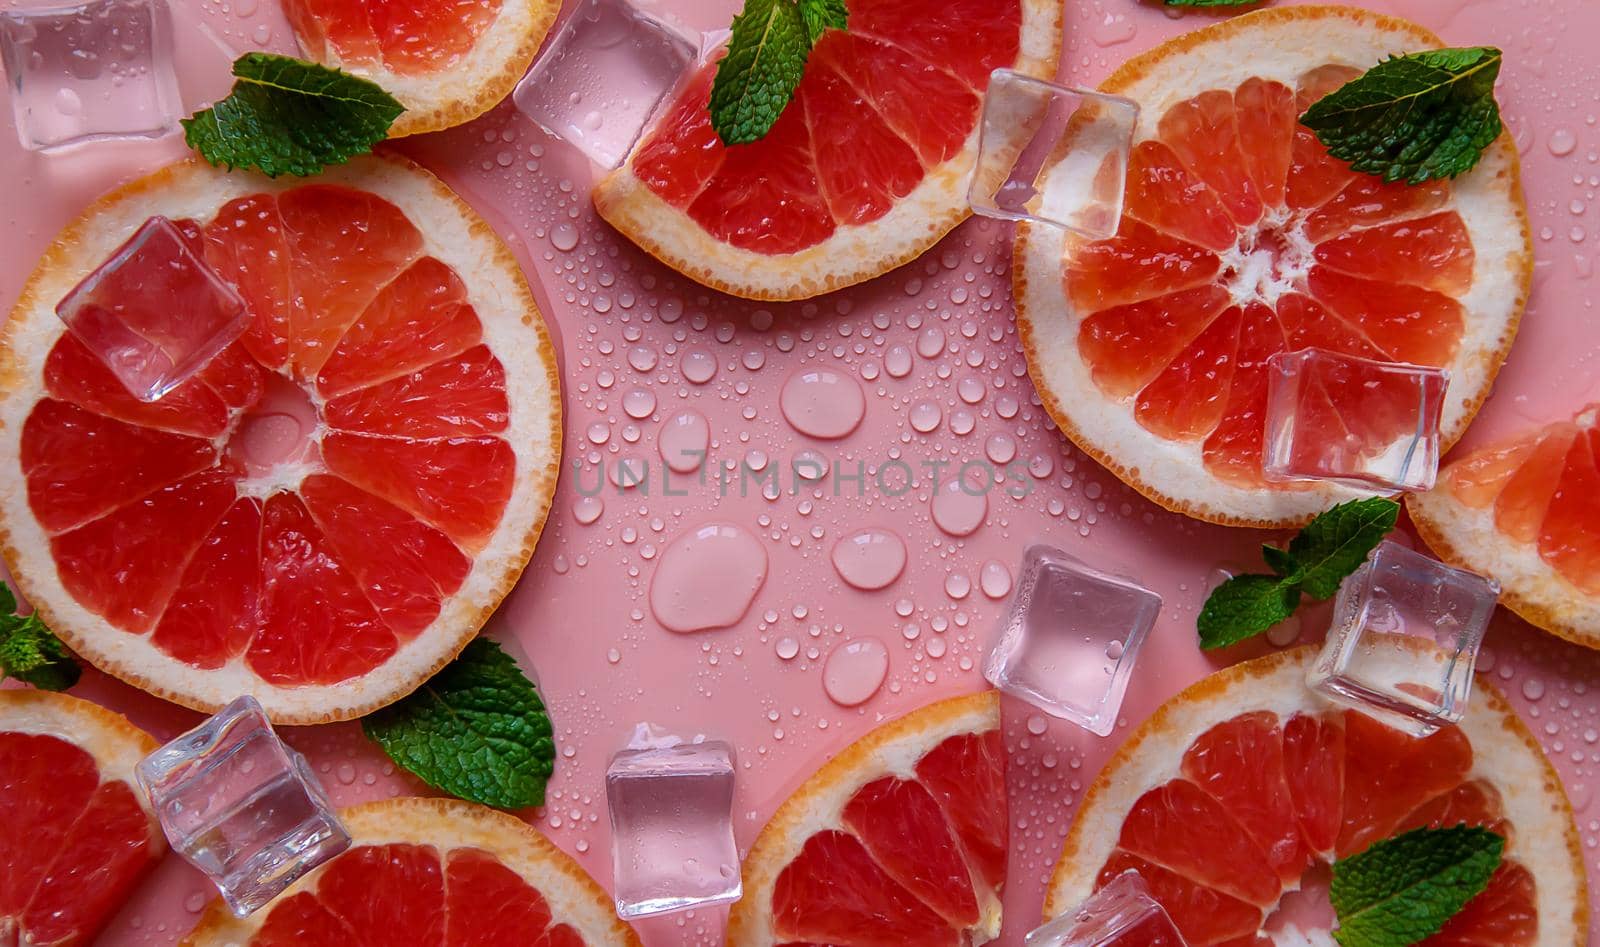 Background with grapefruit and water drops. Selective focus. Spa.